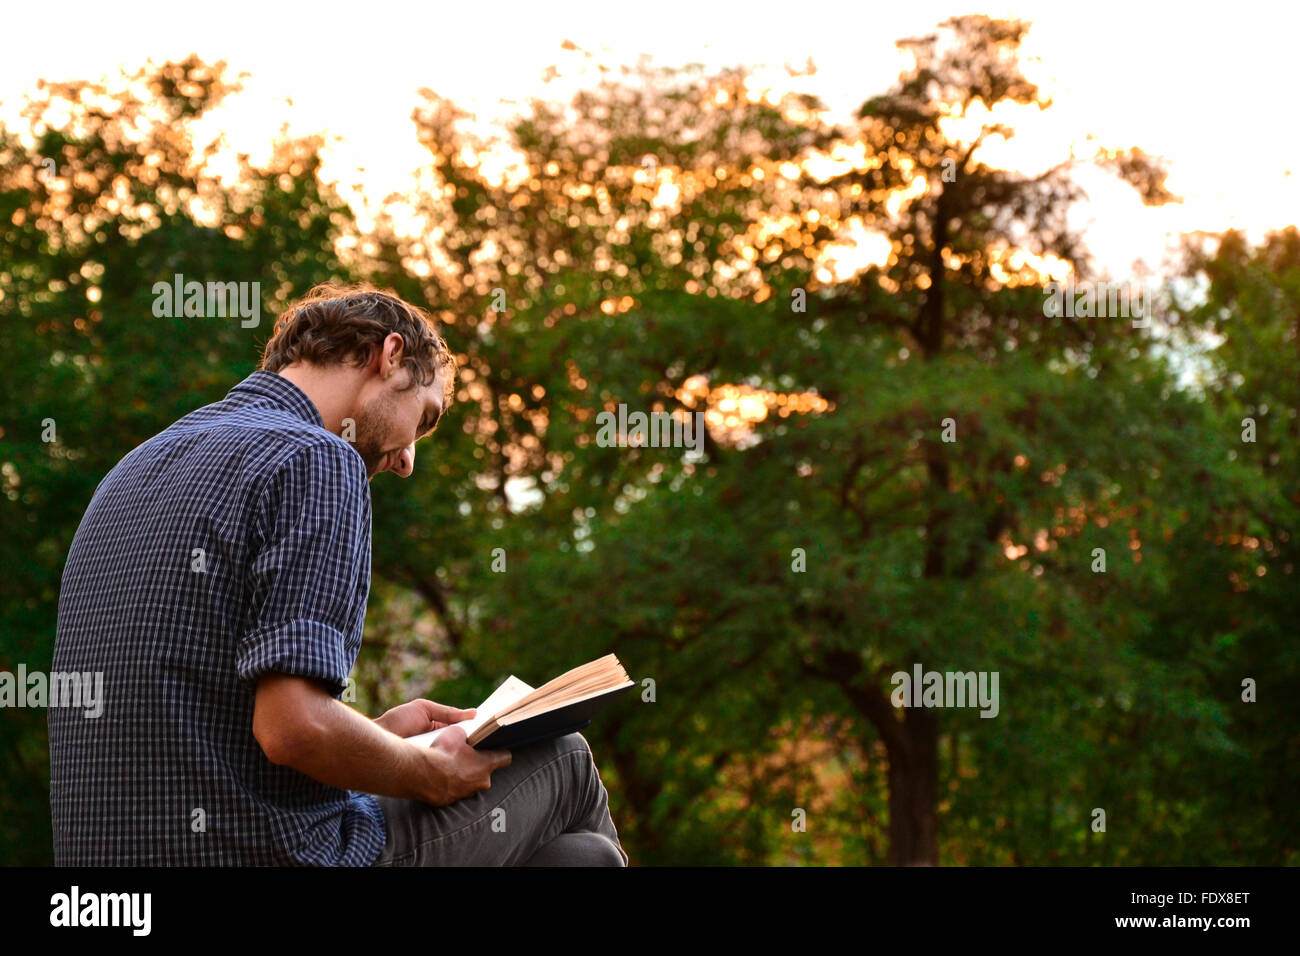 Guy sitting on a bench in the park reading book Stock Photo